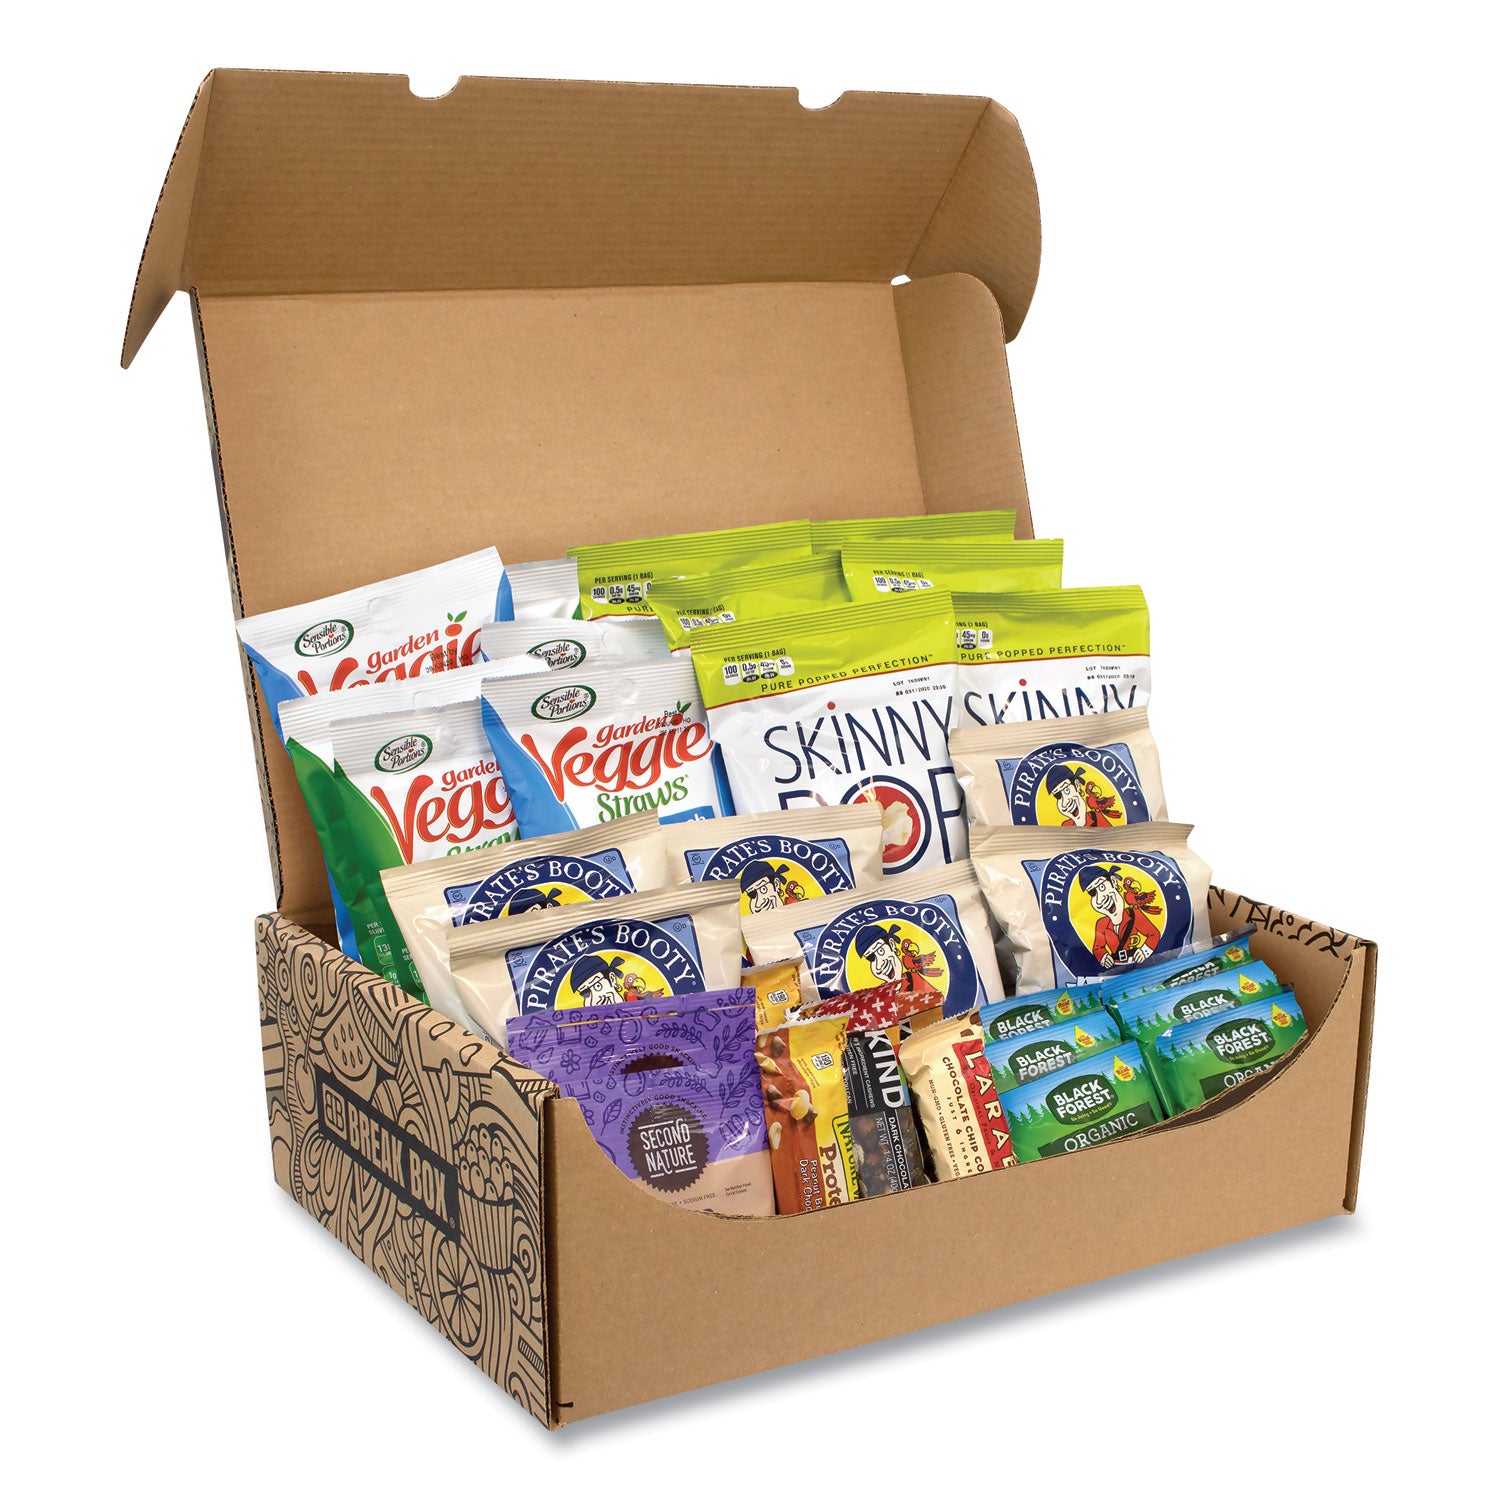 gluten-free-snack-box-32-assorted-snacks-box-ships-in-1-3-business-days_grr700s0004 - 1